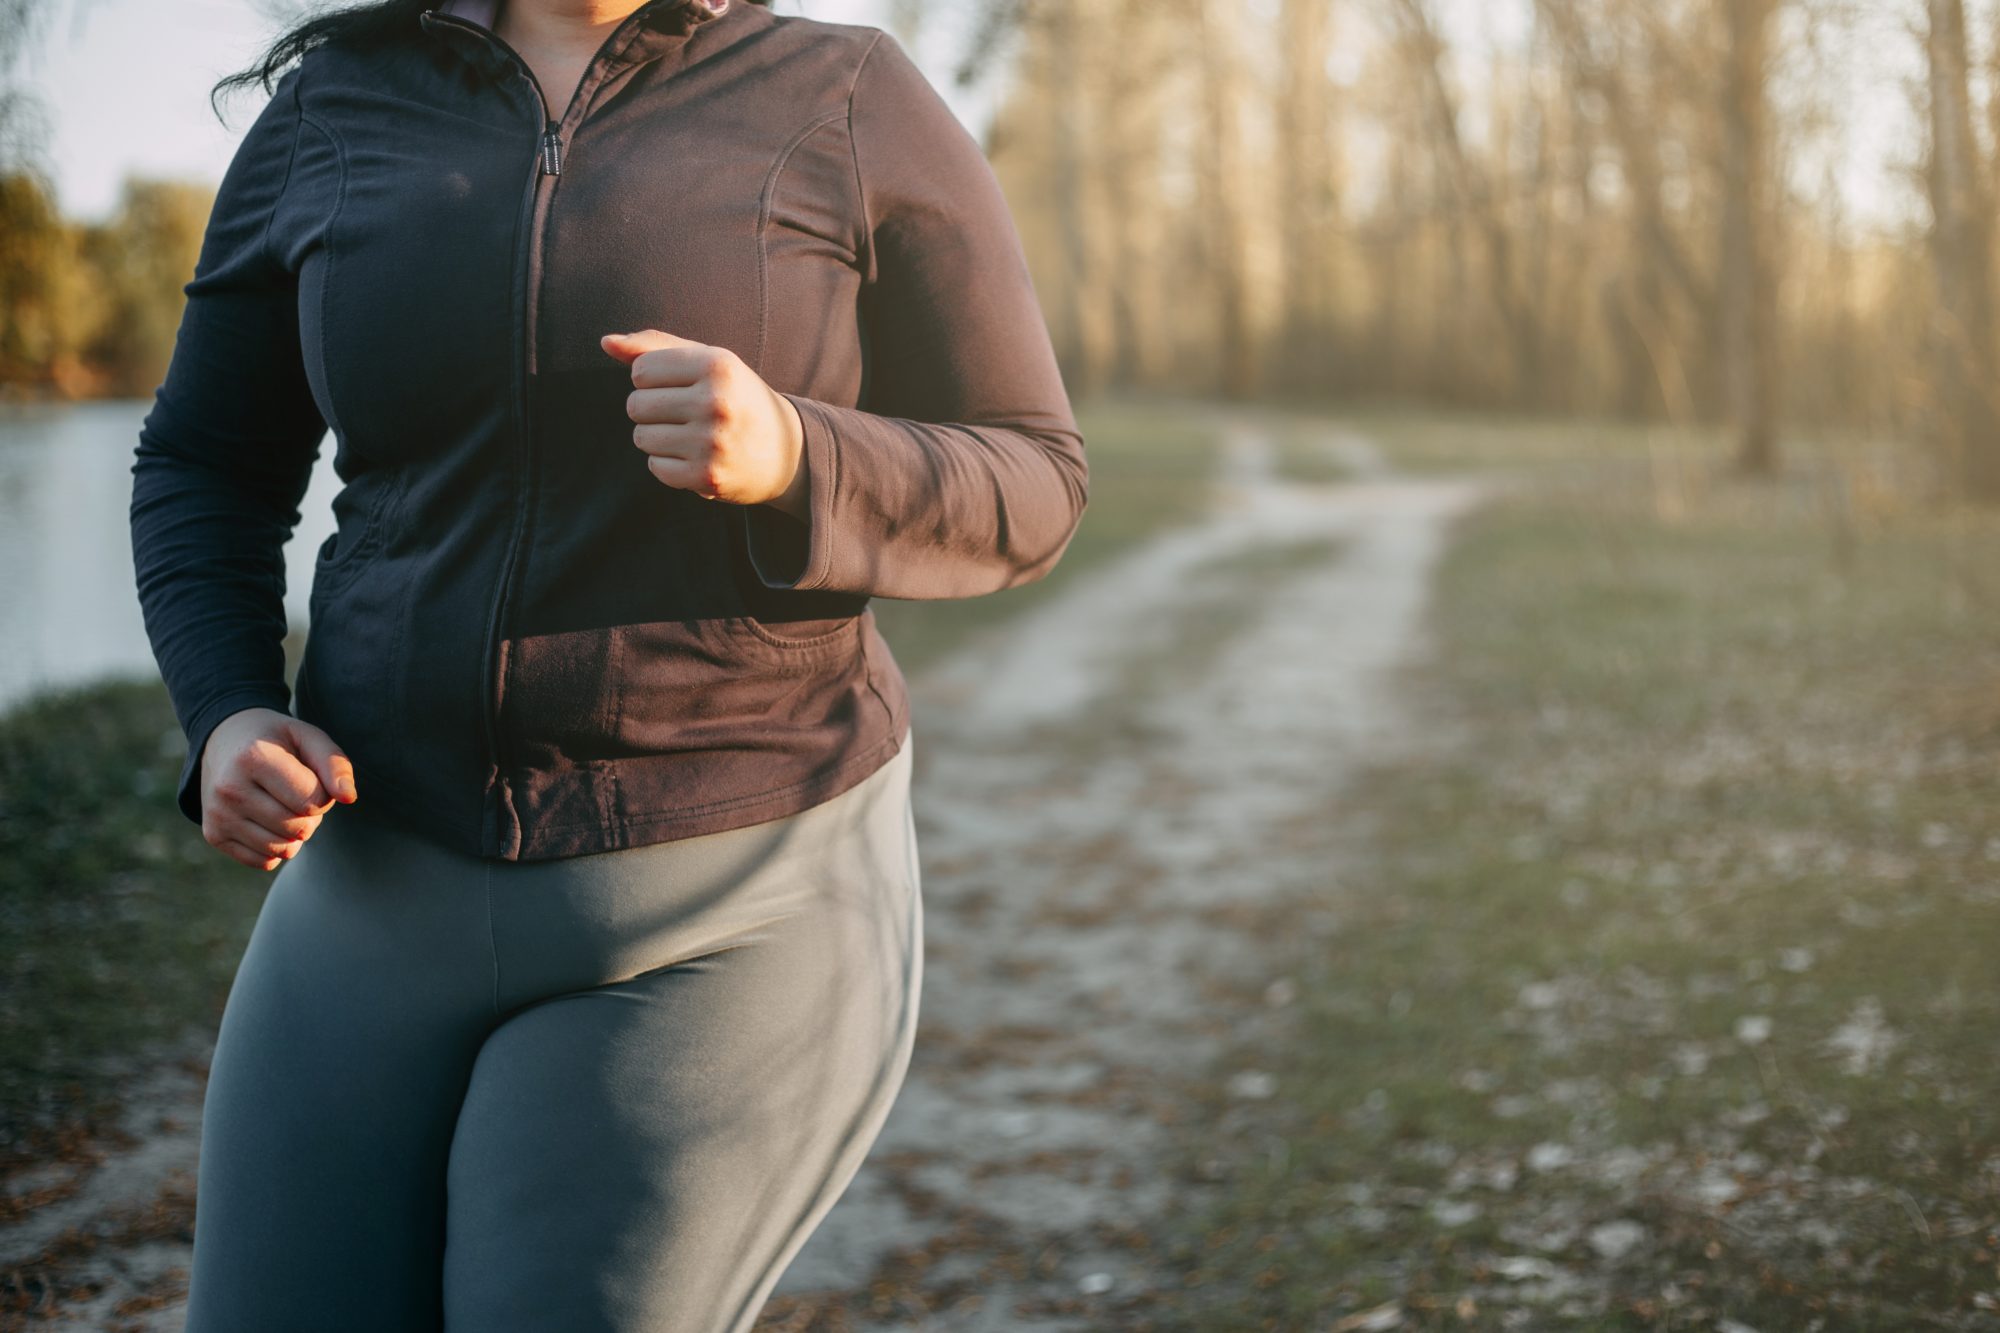 Woman jogging in effort to lose weight 